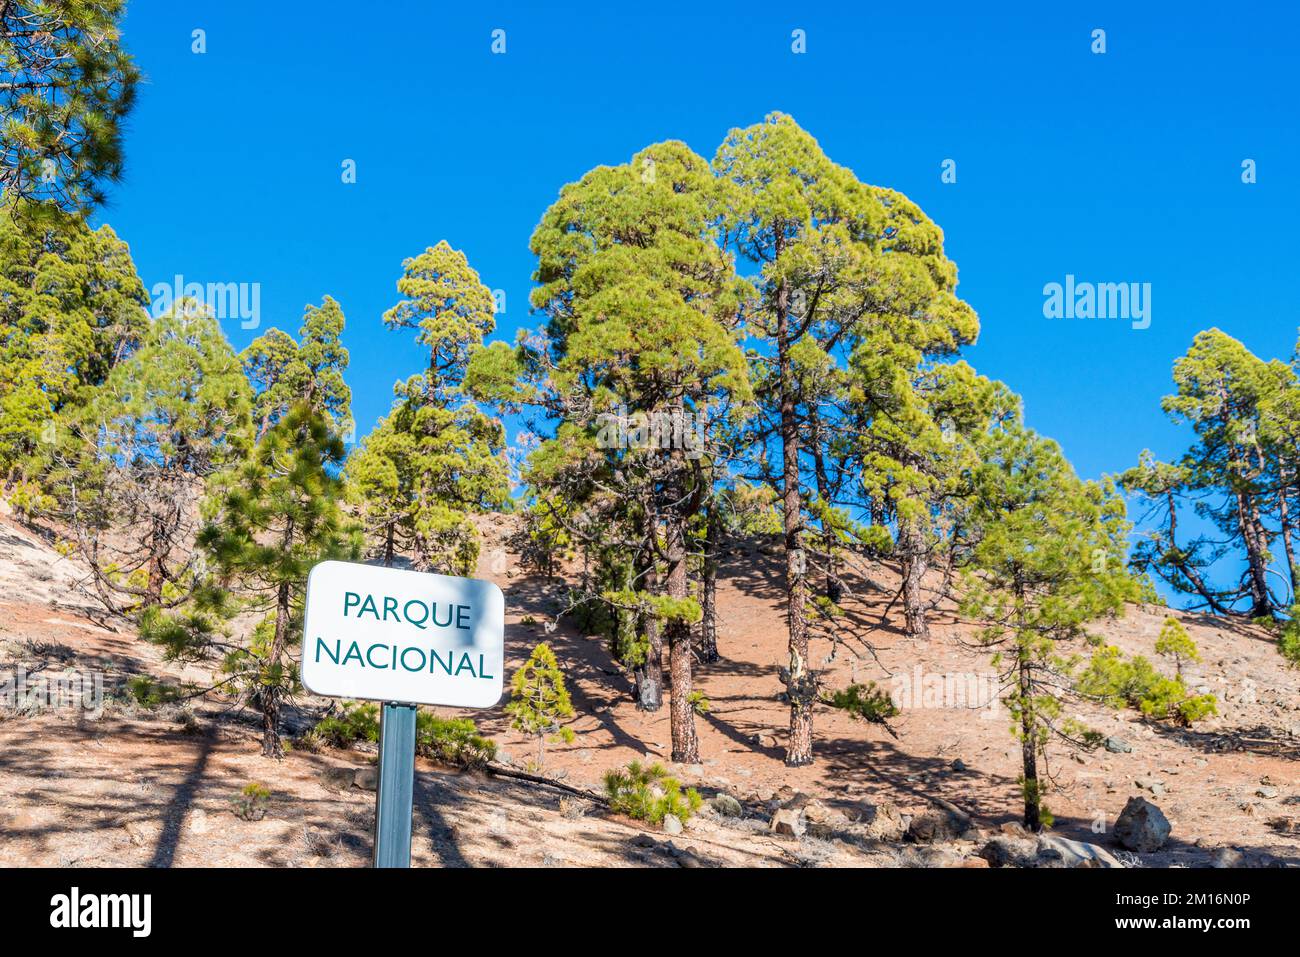 Pinus canariensis, the Canary Island pine, is a species of gymnosperm in the conifer family Pinaceae, on the island of Tenerife. Stock Photo